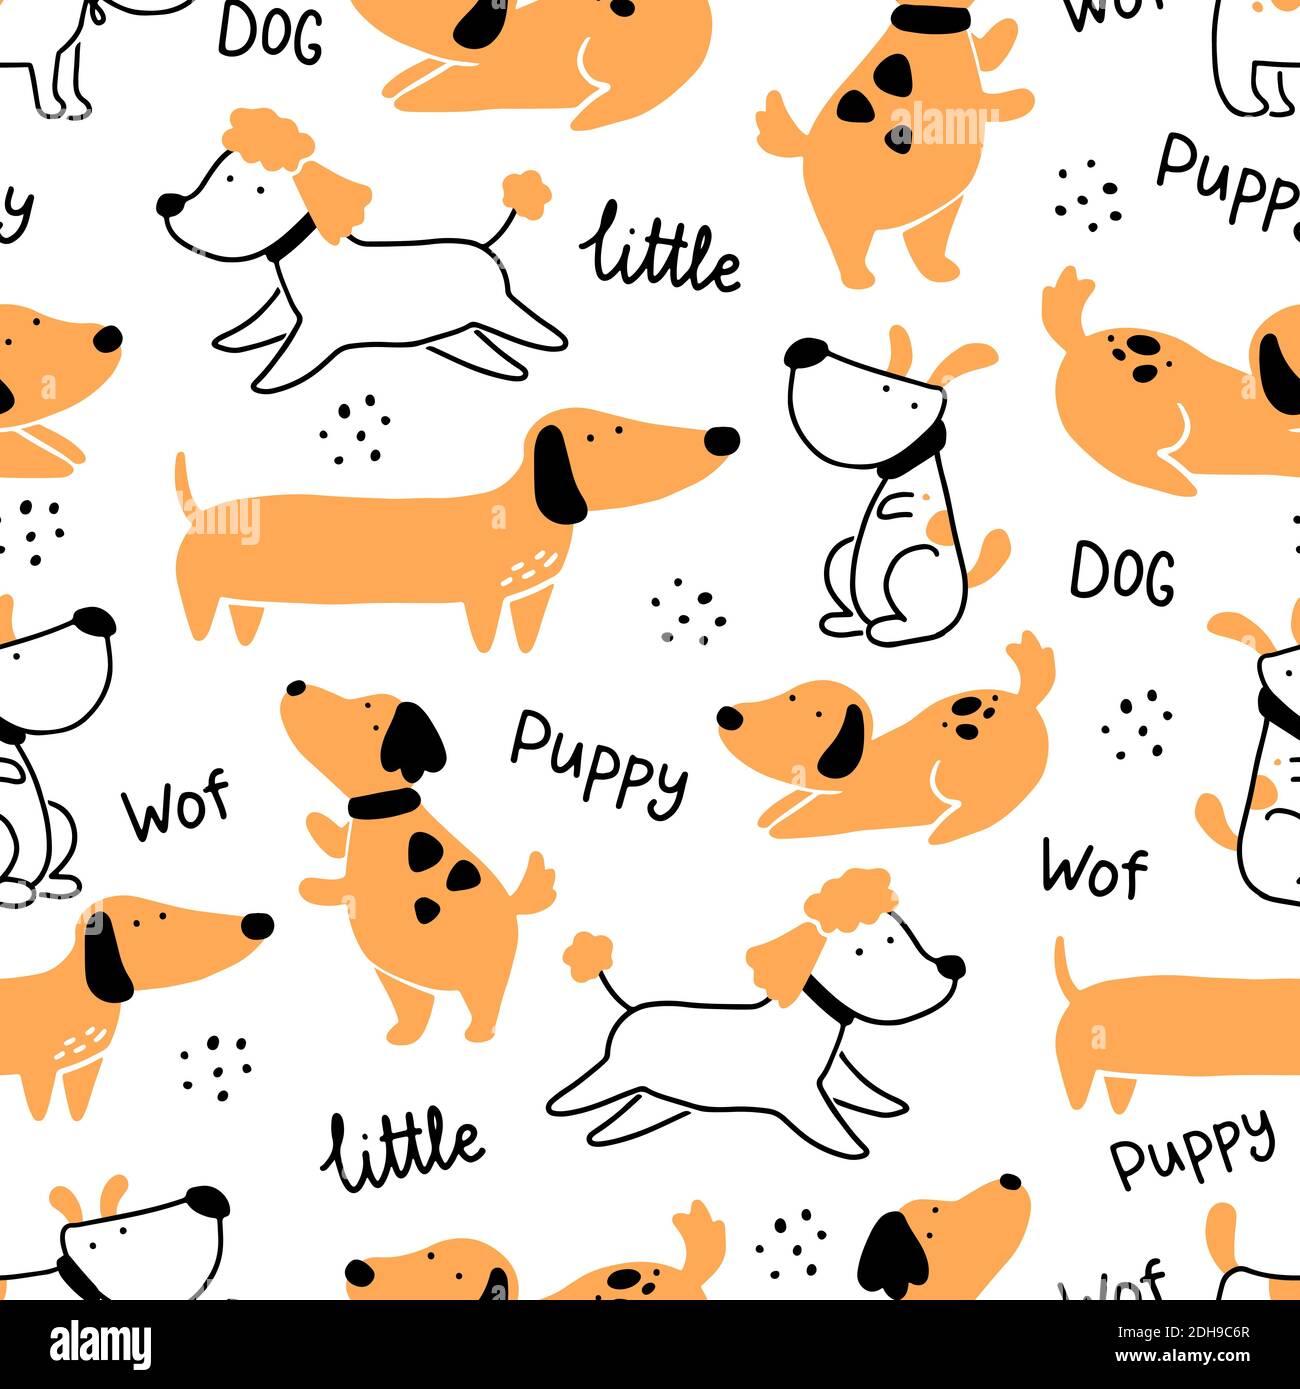 Seamless Pattern Of Cute Dog Puppy Cartoon Funny And Happy